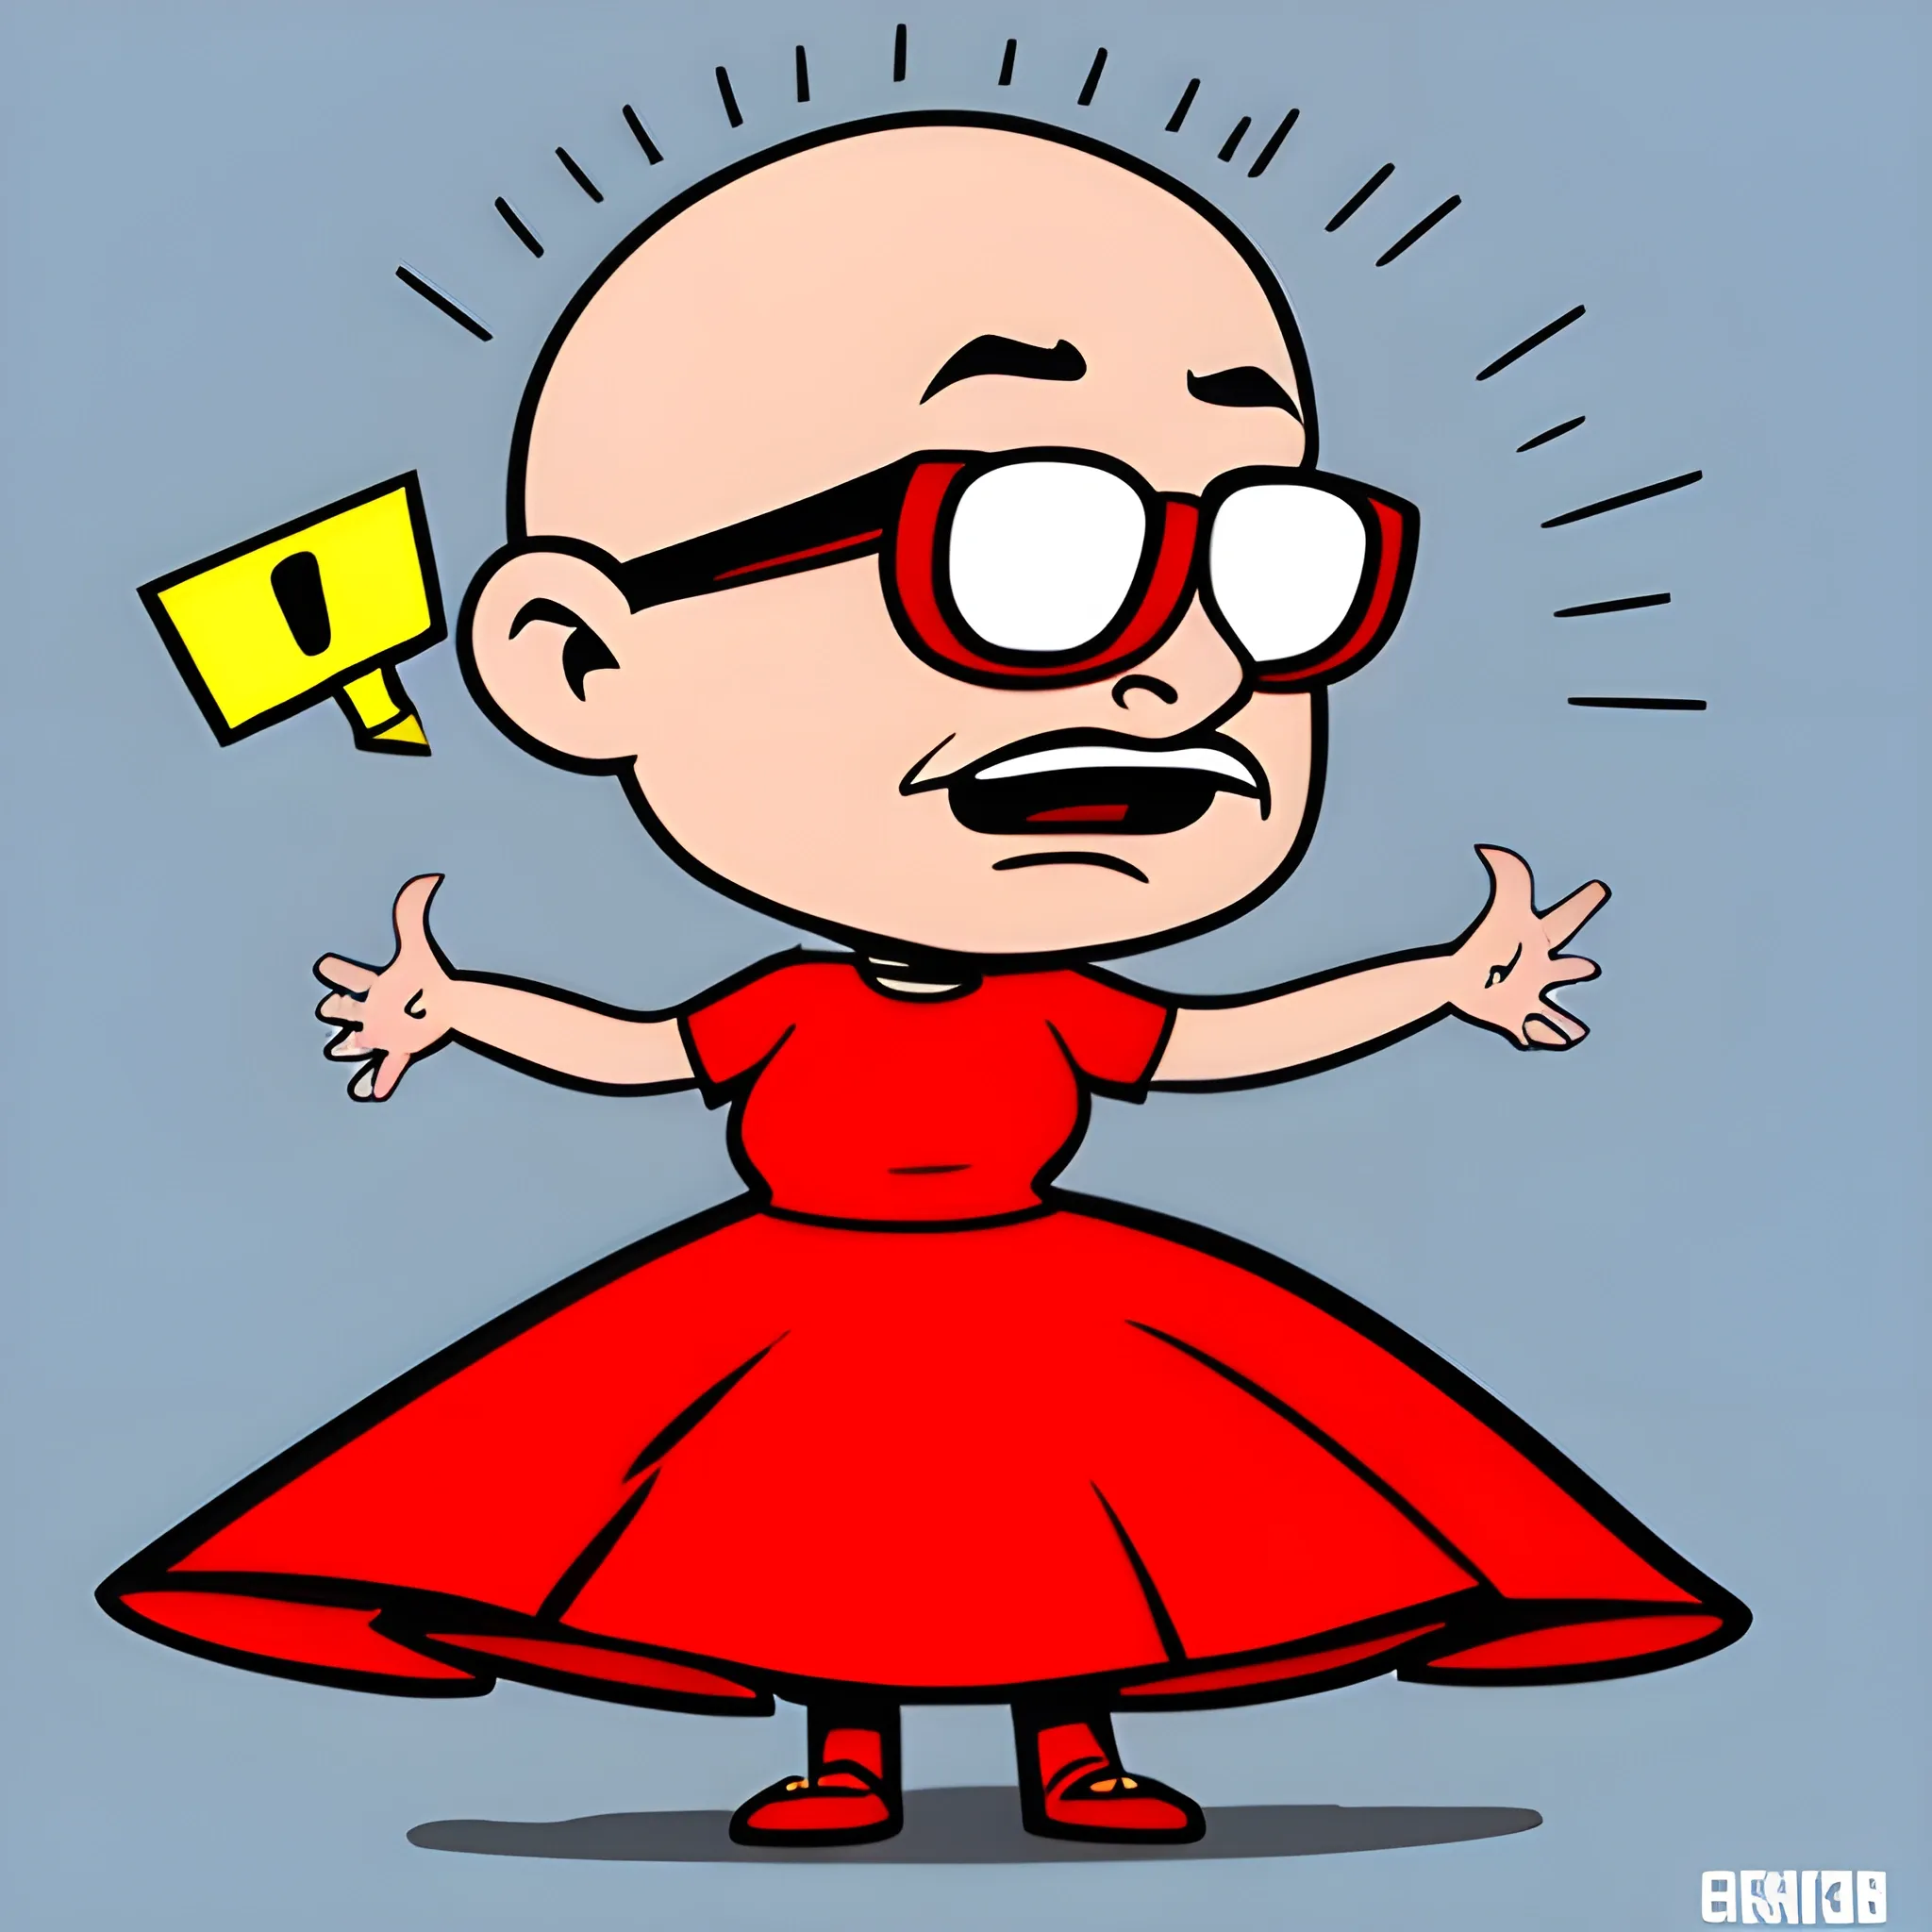 , Cartoon bald guy with sunglasses in a womens red dress saying i chrischan 2.0